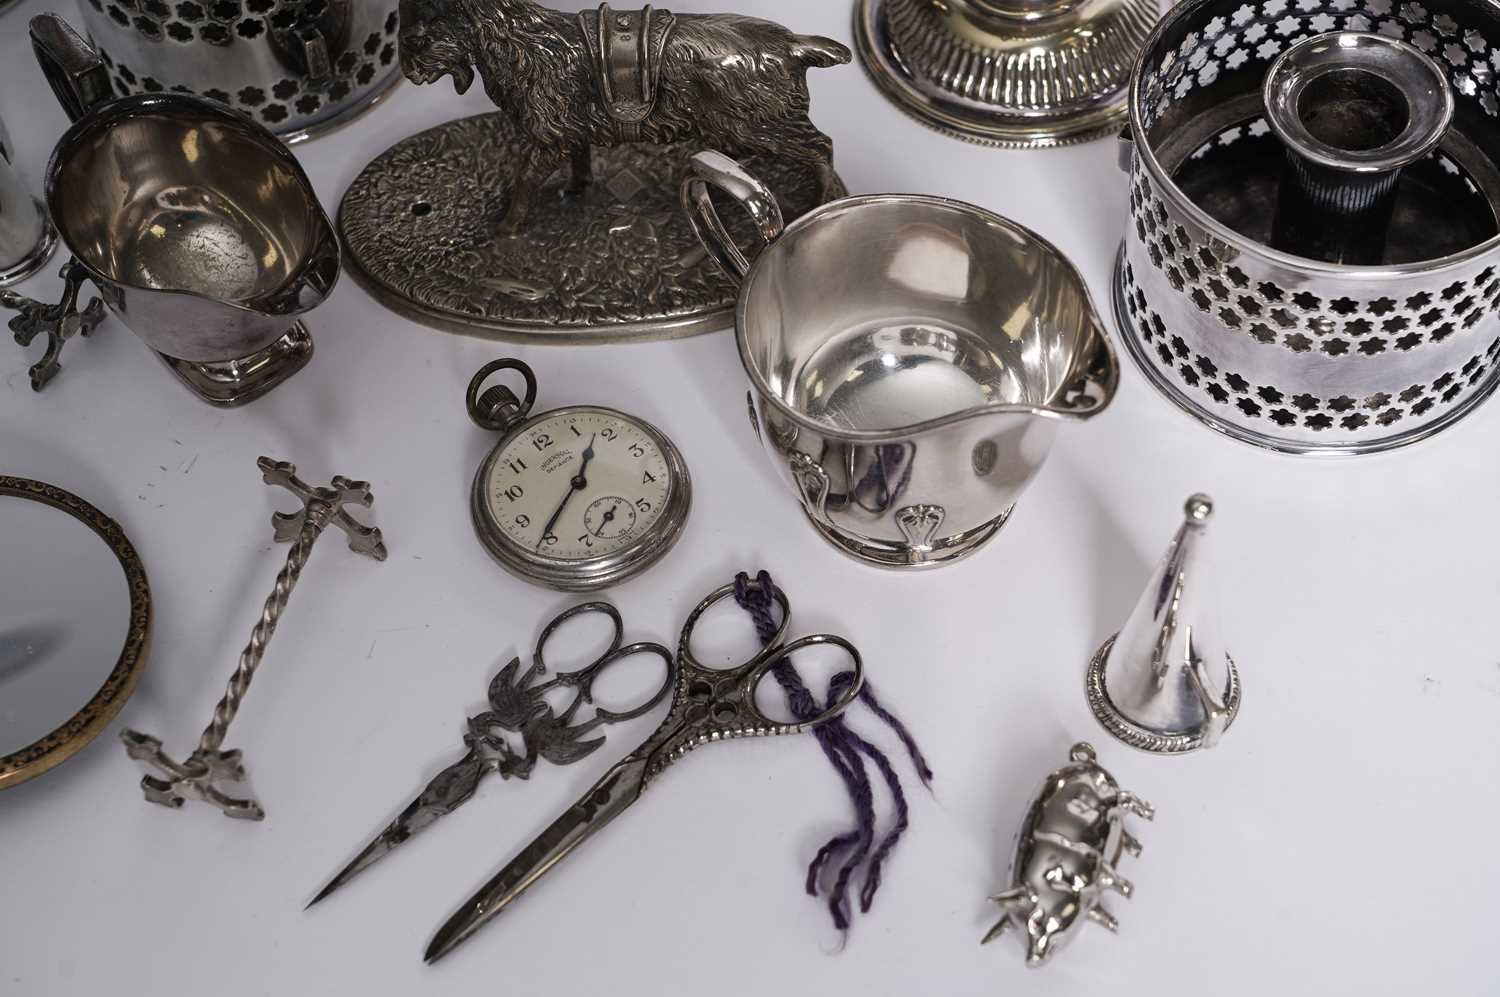 An Ingersoll 'Defiance' pocket watch and a selection of silver plated and white metal wares - Image 4 of 4